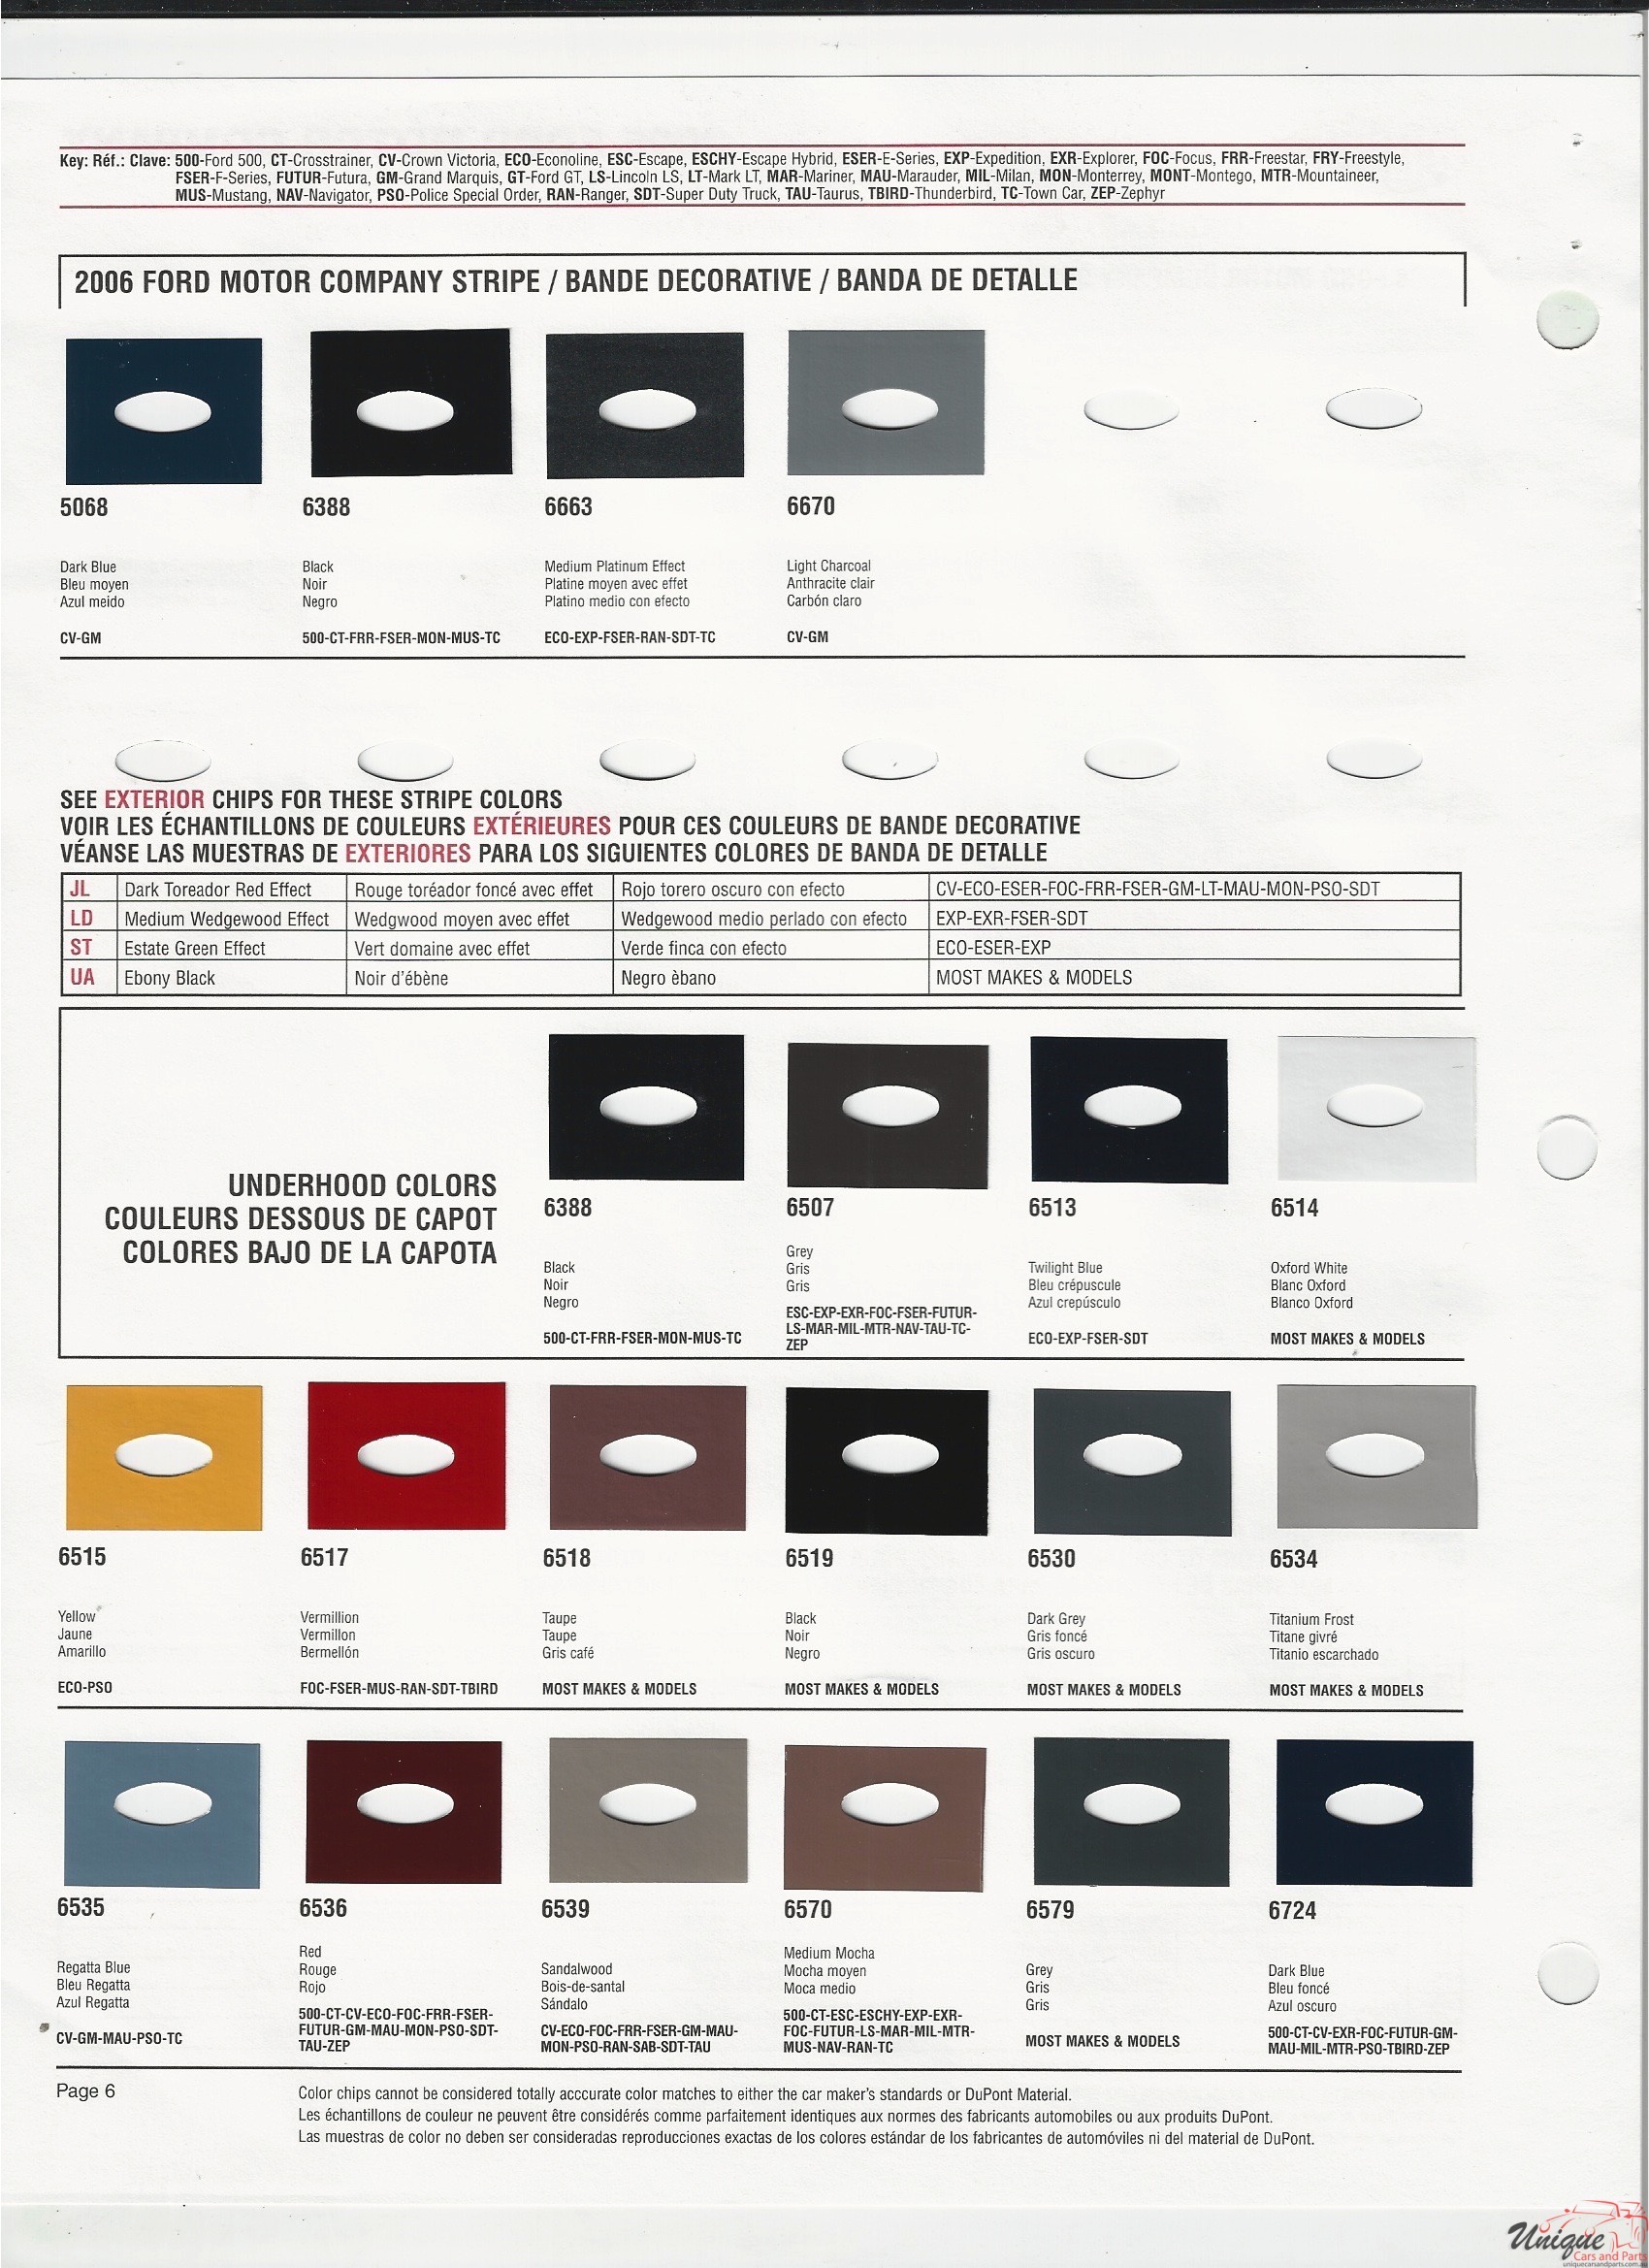 2006 Ford-5 Paint Charts